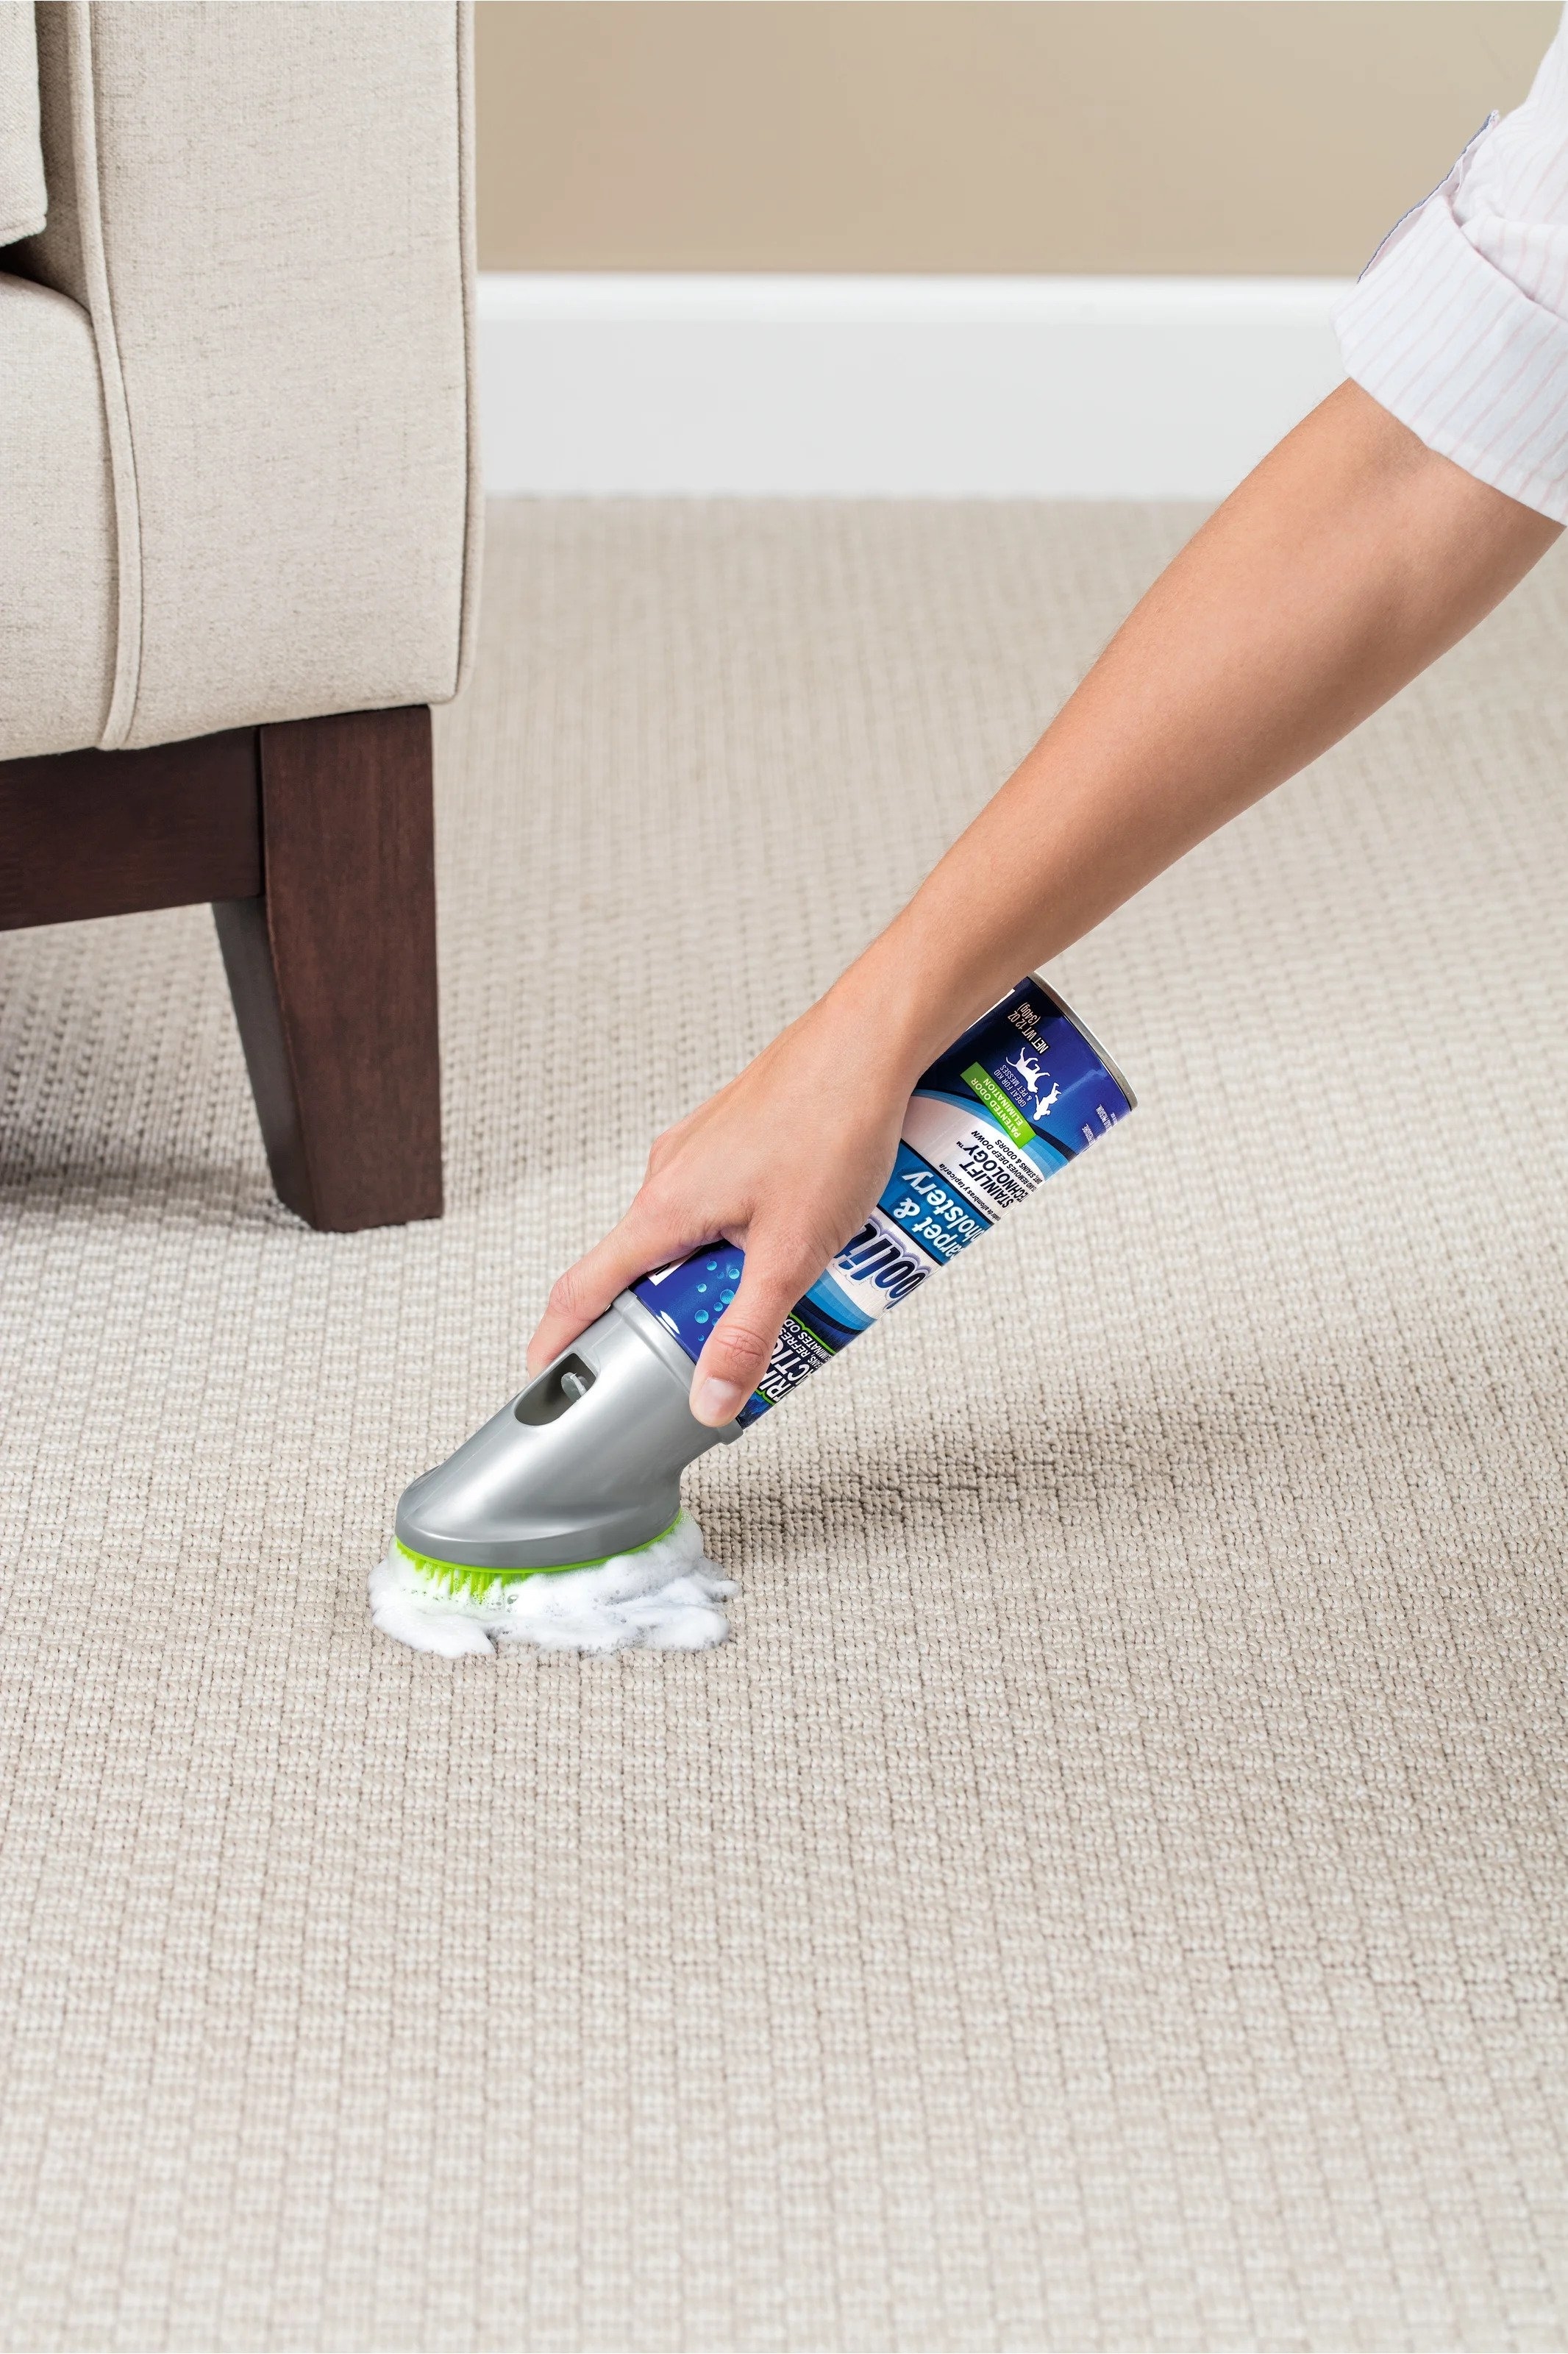 the carpet cleaner being used on light carpet